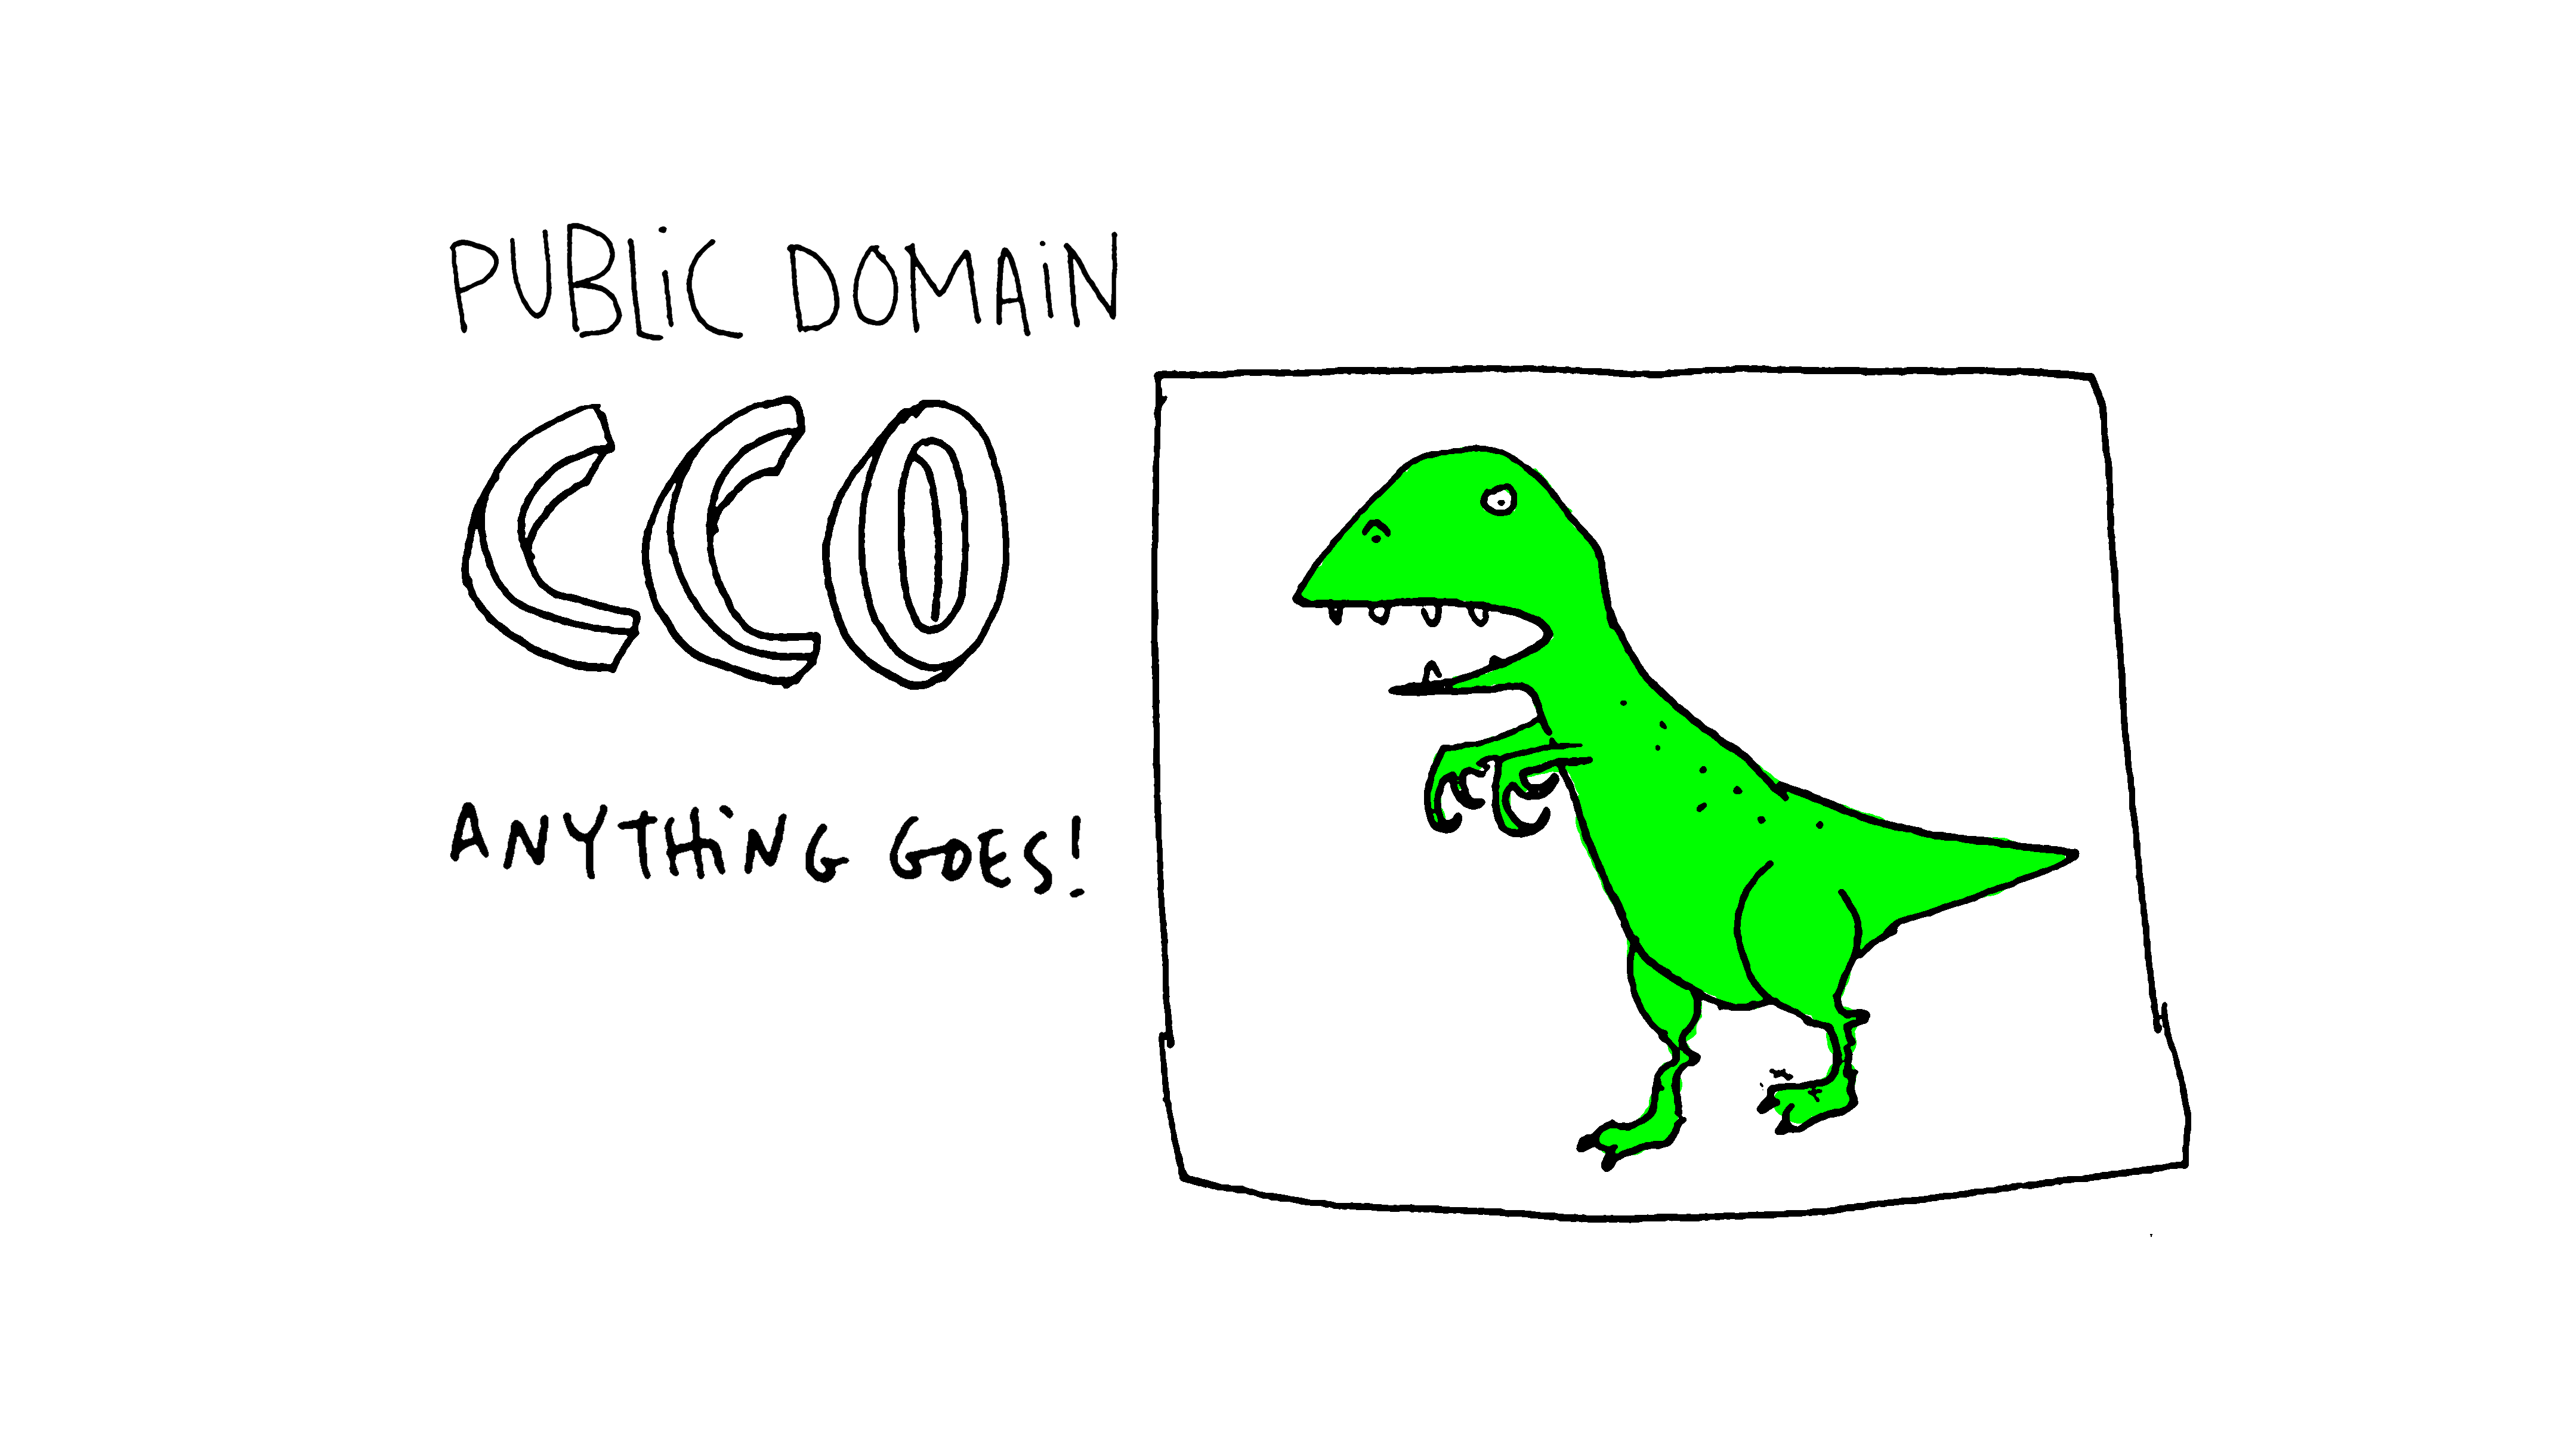 File:Chrome Dinosaur Game.png - Wikimedia Commons